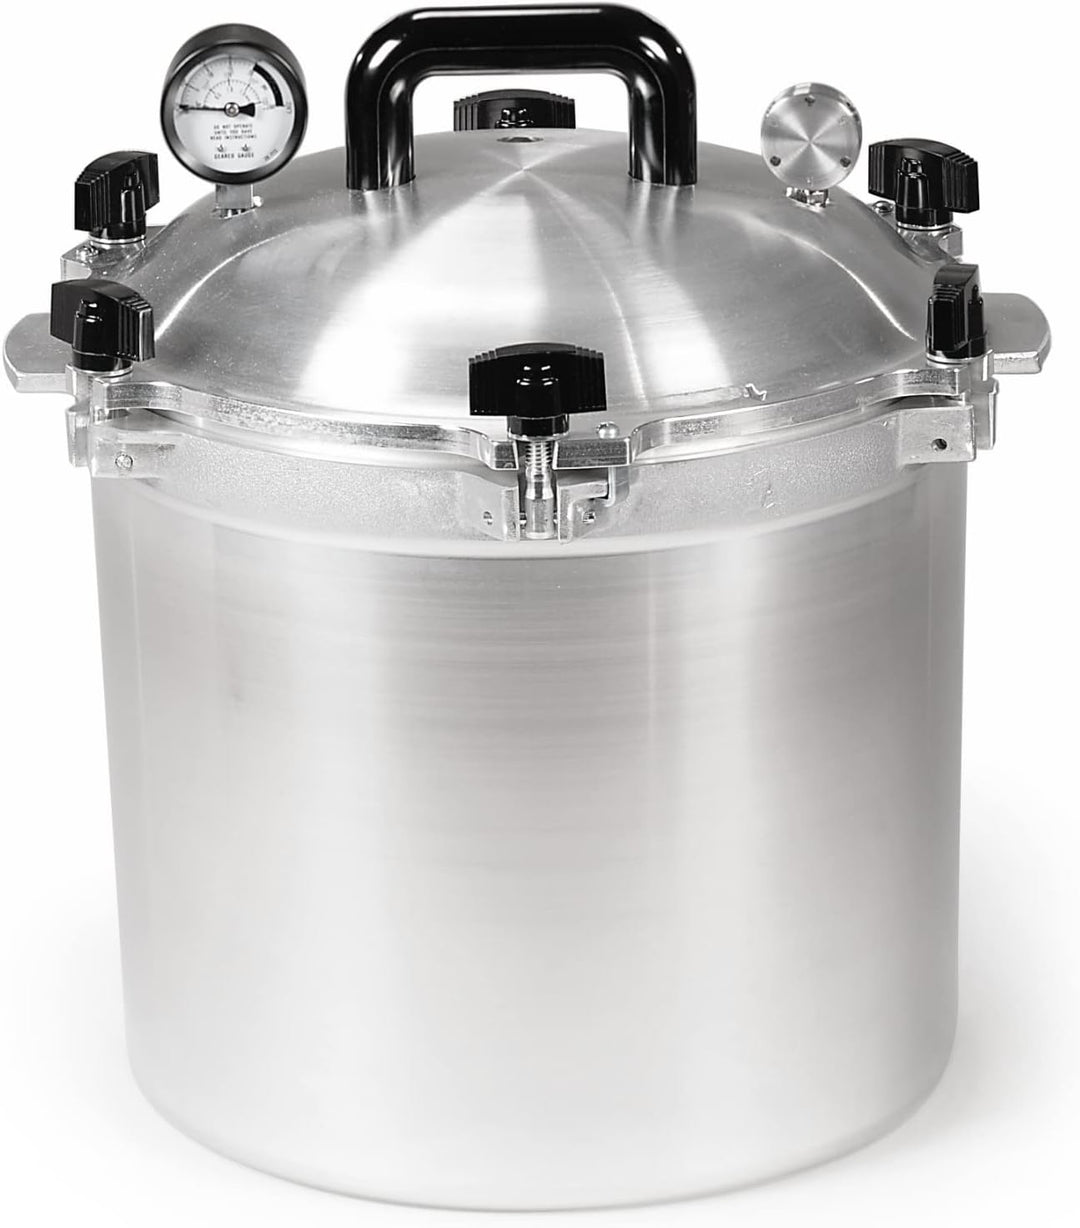 All American Pressure Canner 921